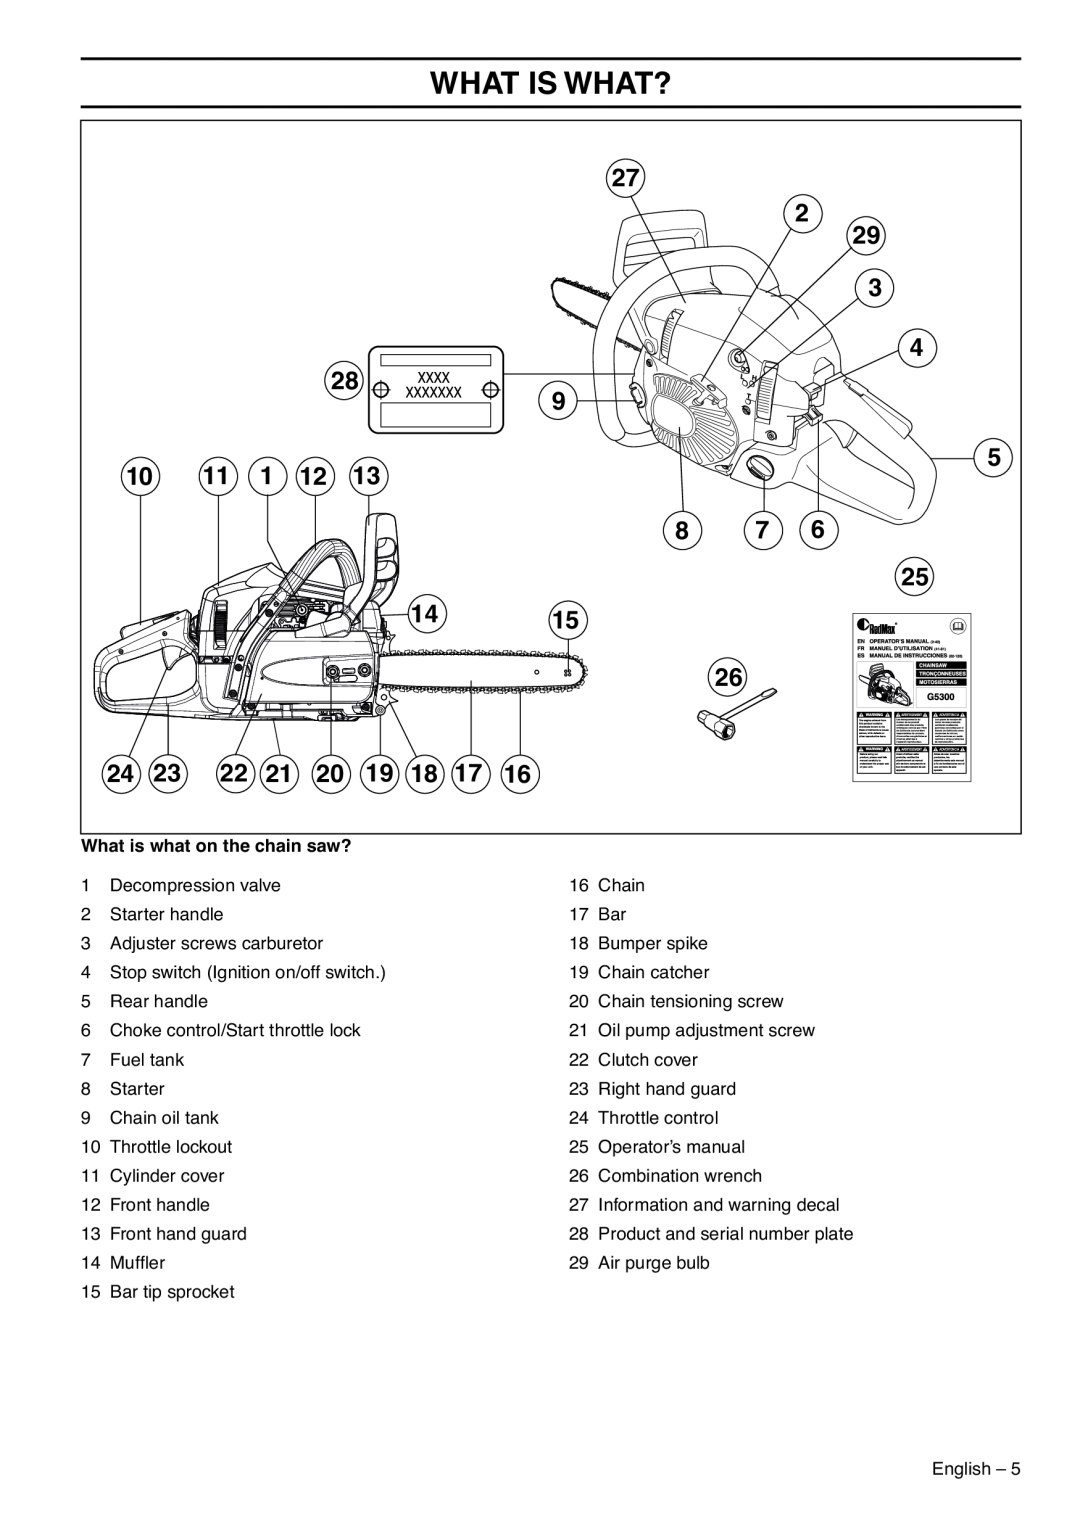 RedMax G5300 manual What Is What?, What is what on the chain saw? 